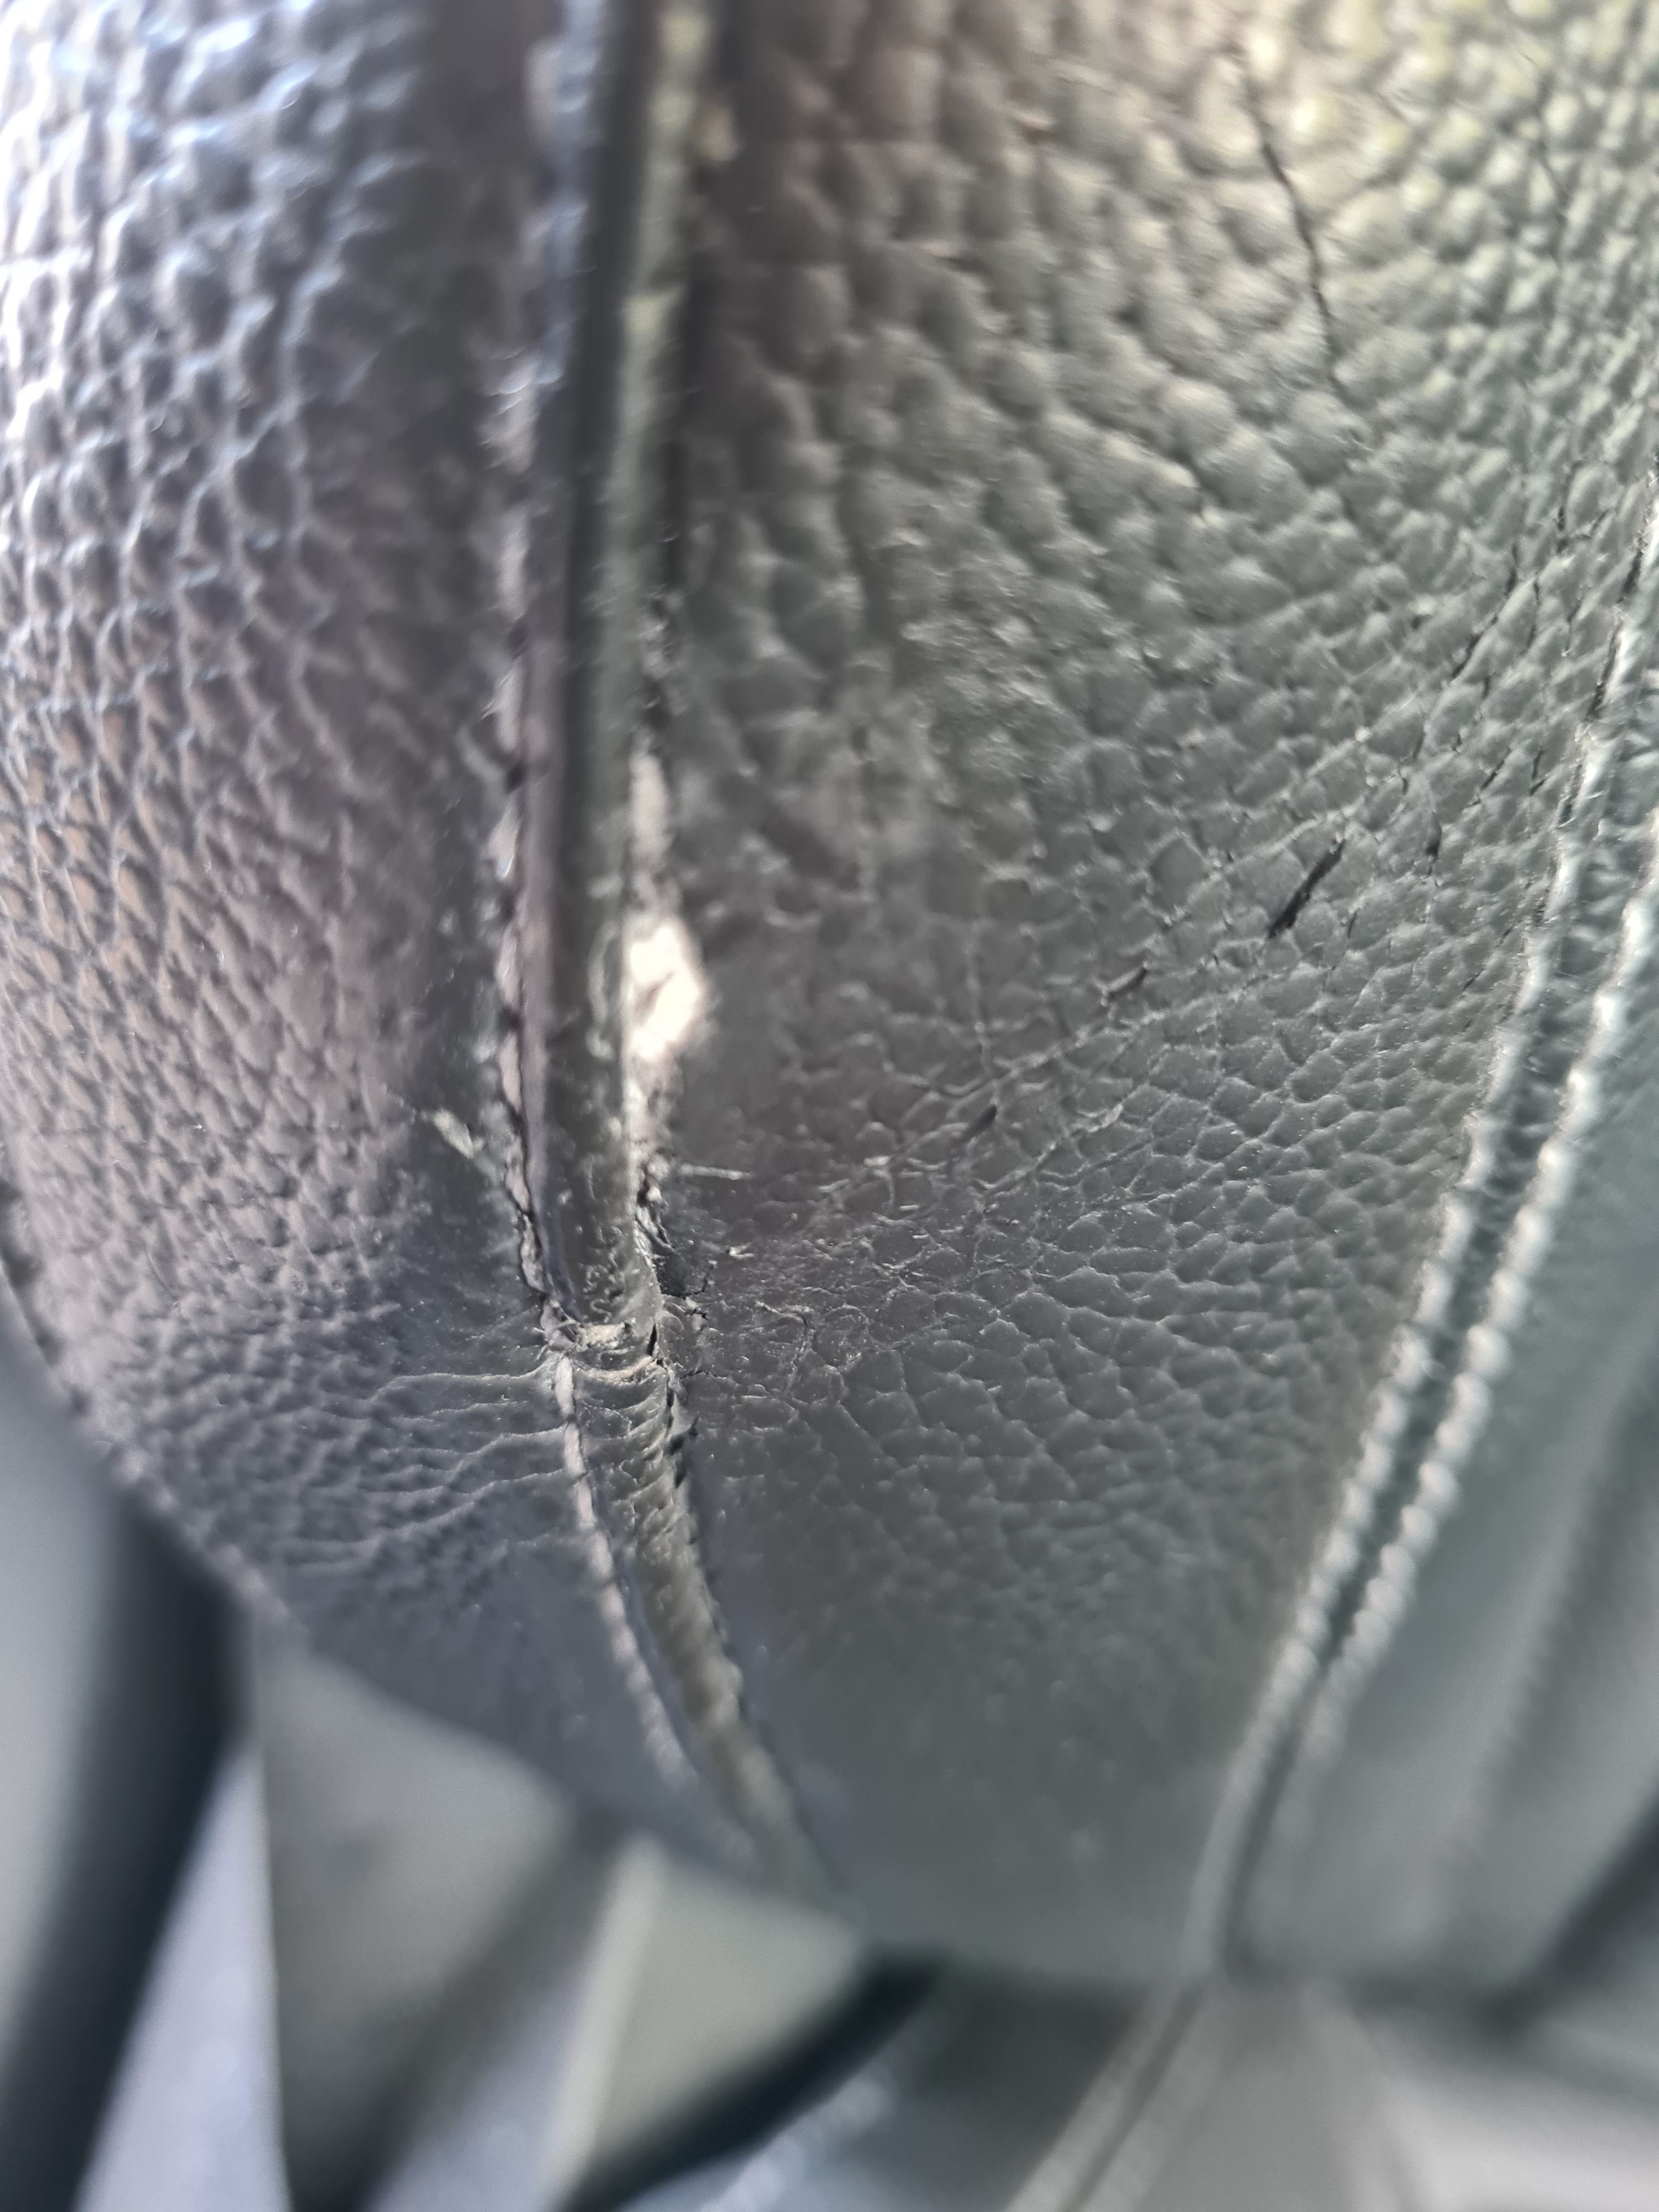 Crack in Leather along stitching